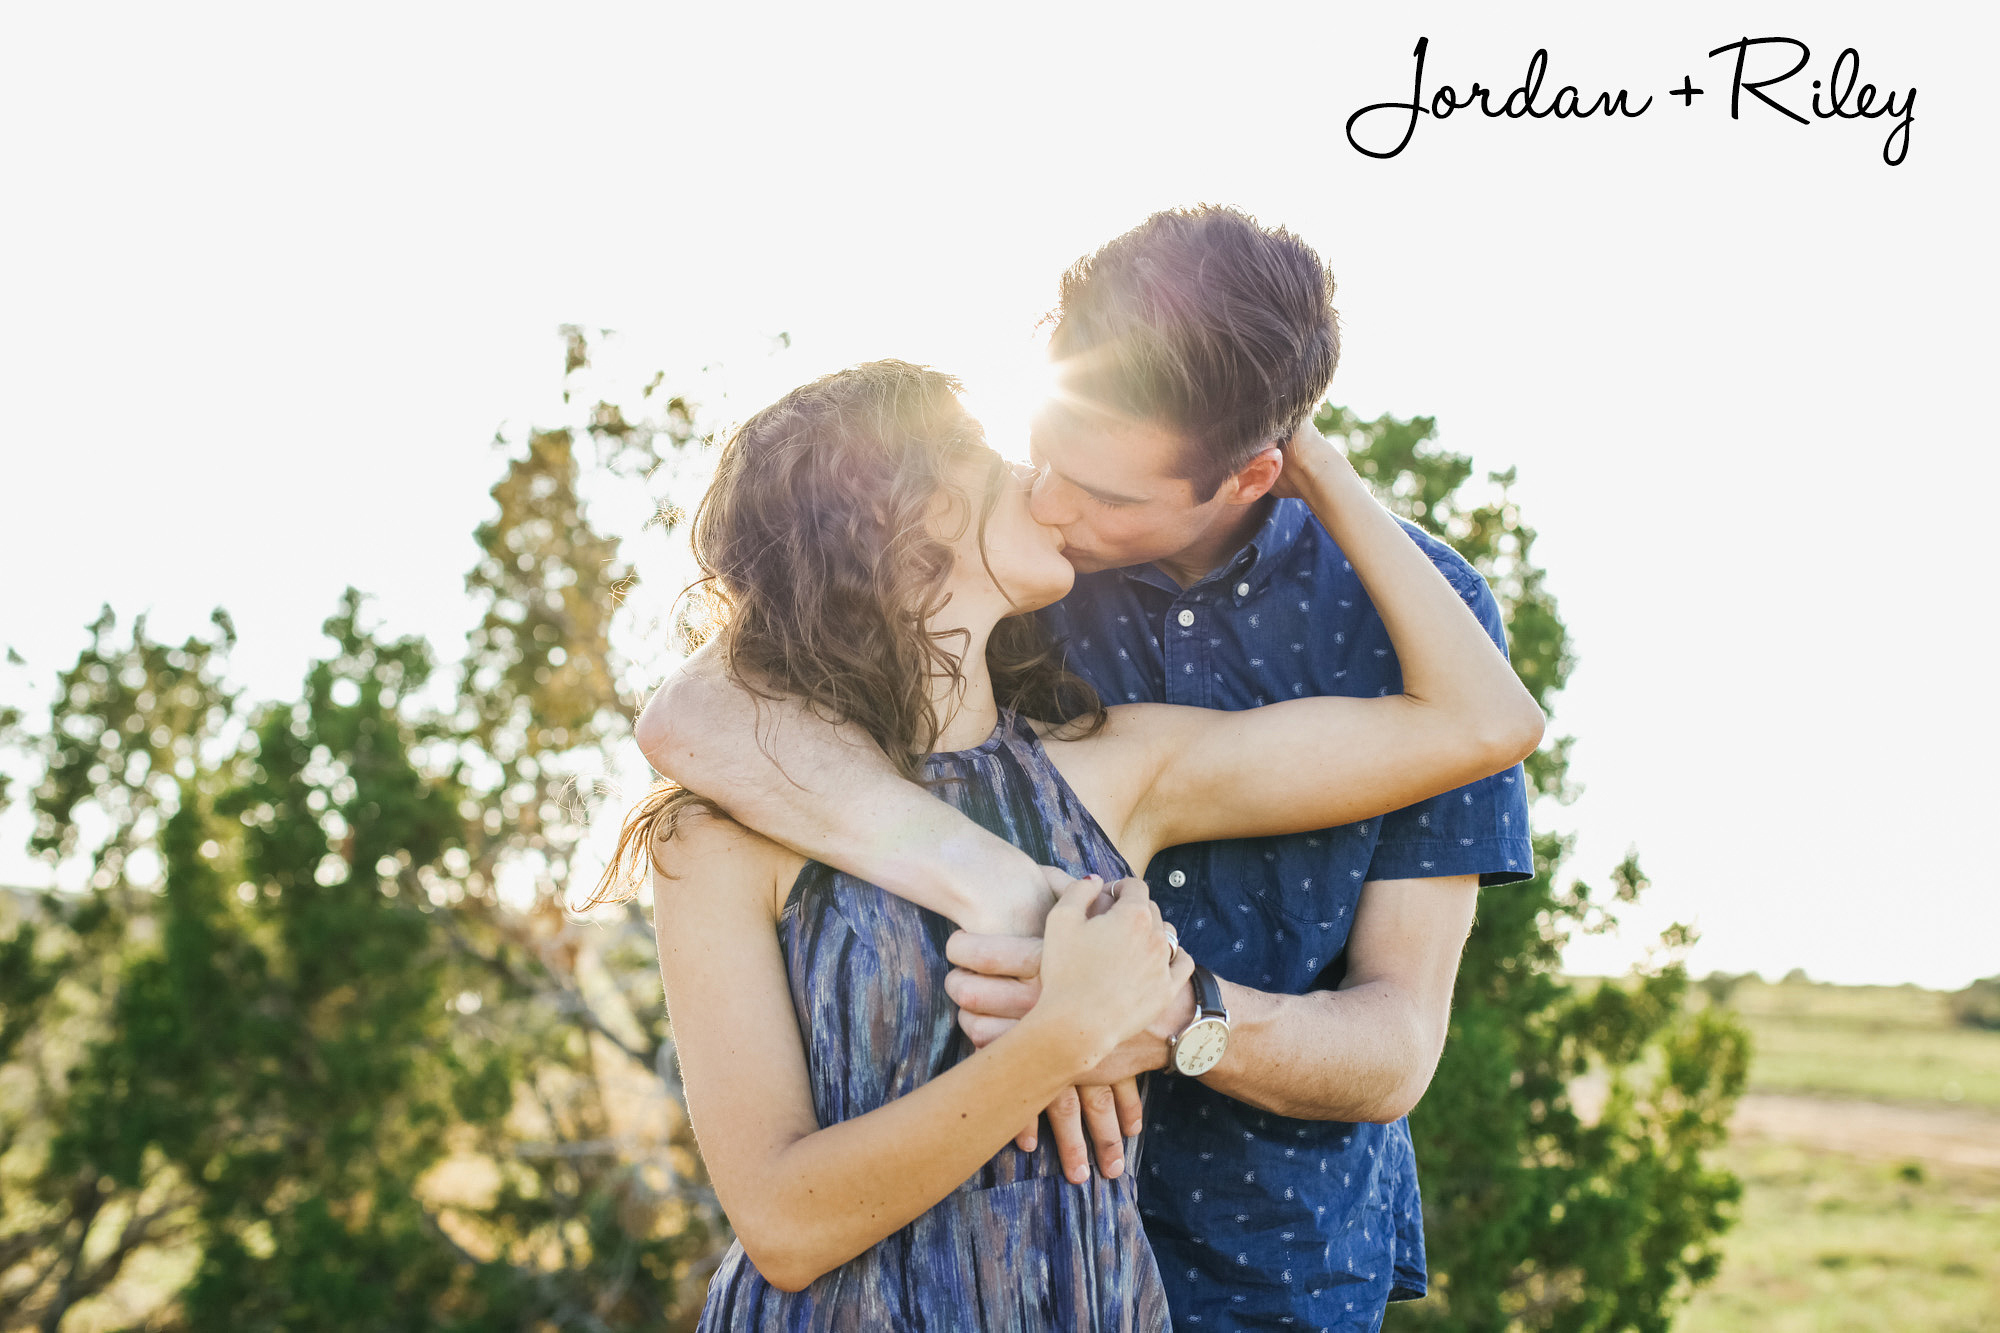 Jordan and Riley kissing at their engagement session in the desert. Santa Fe wedding photographer.